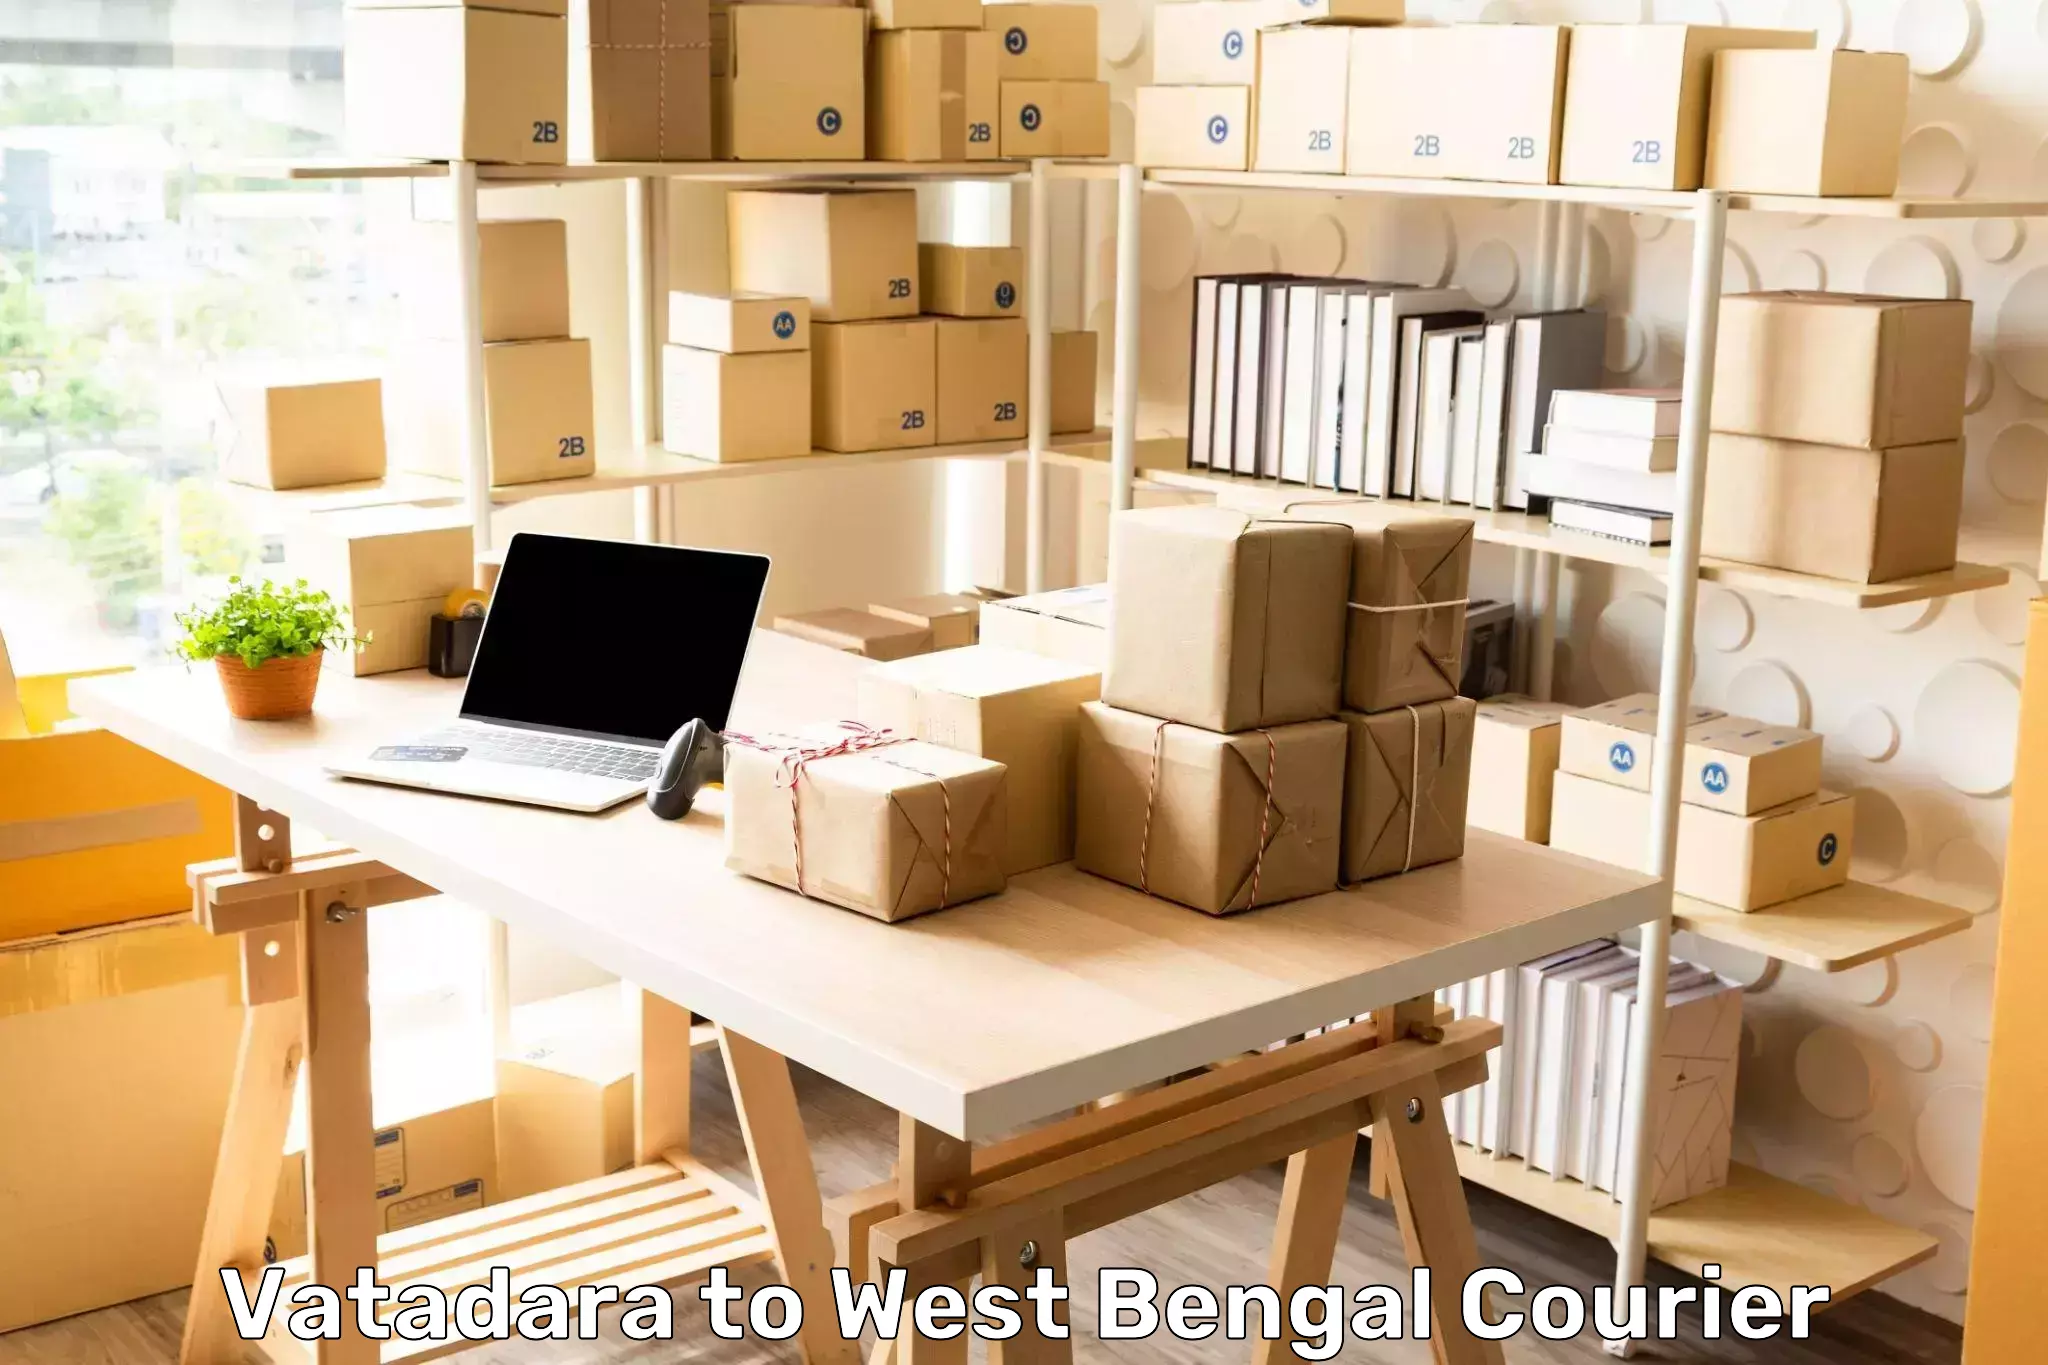 Nationwide shipping capabilities in Vatadara to West Bengal